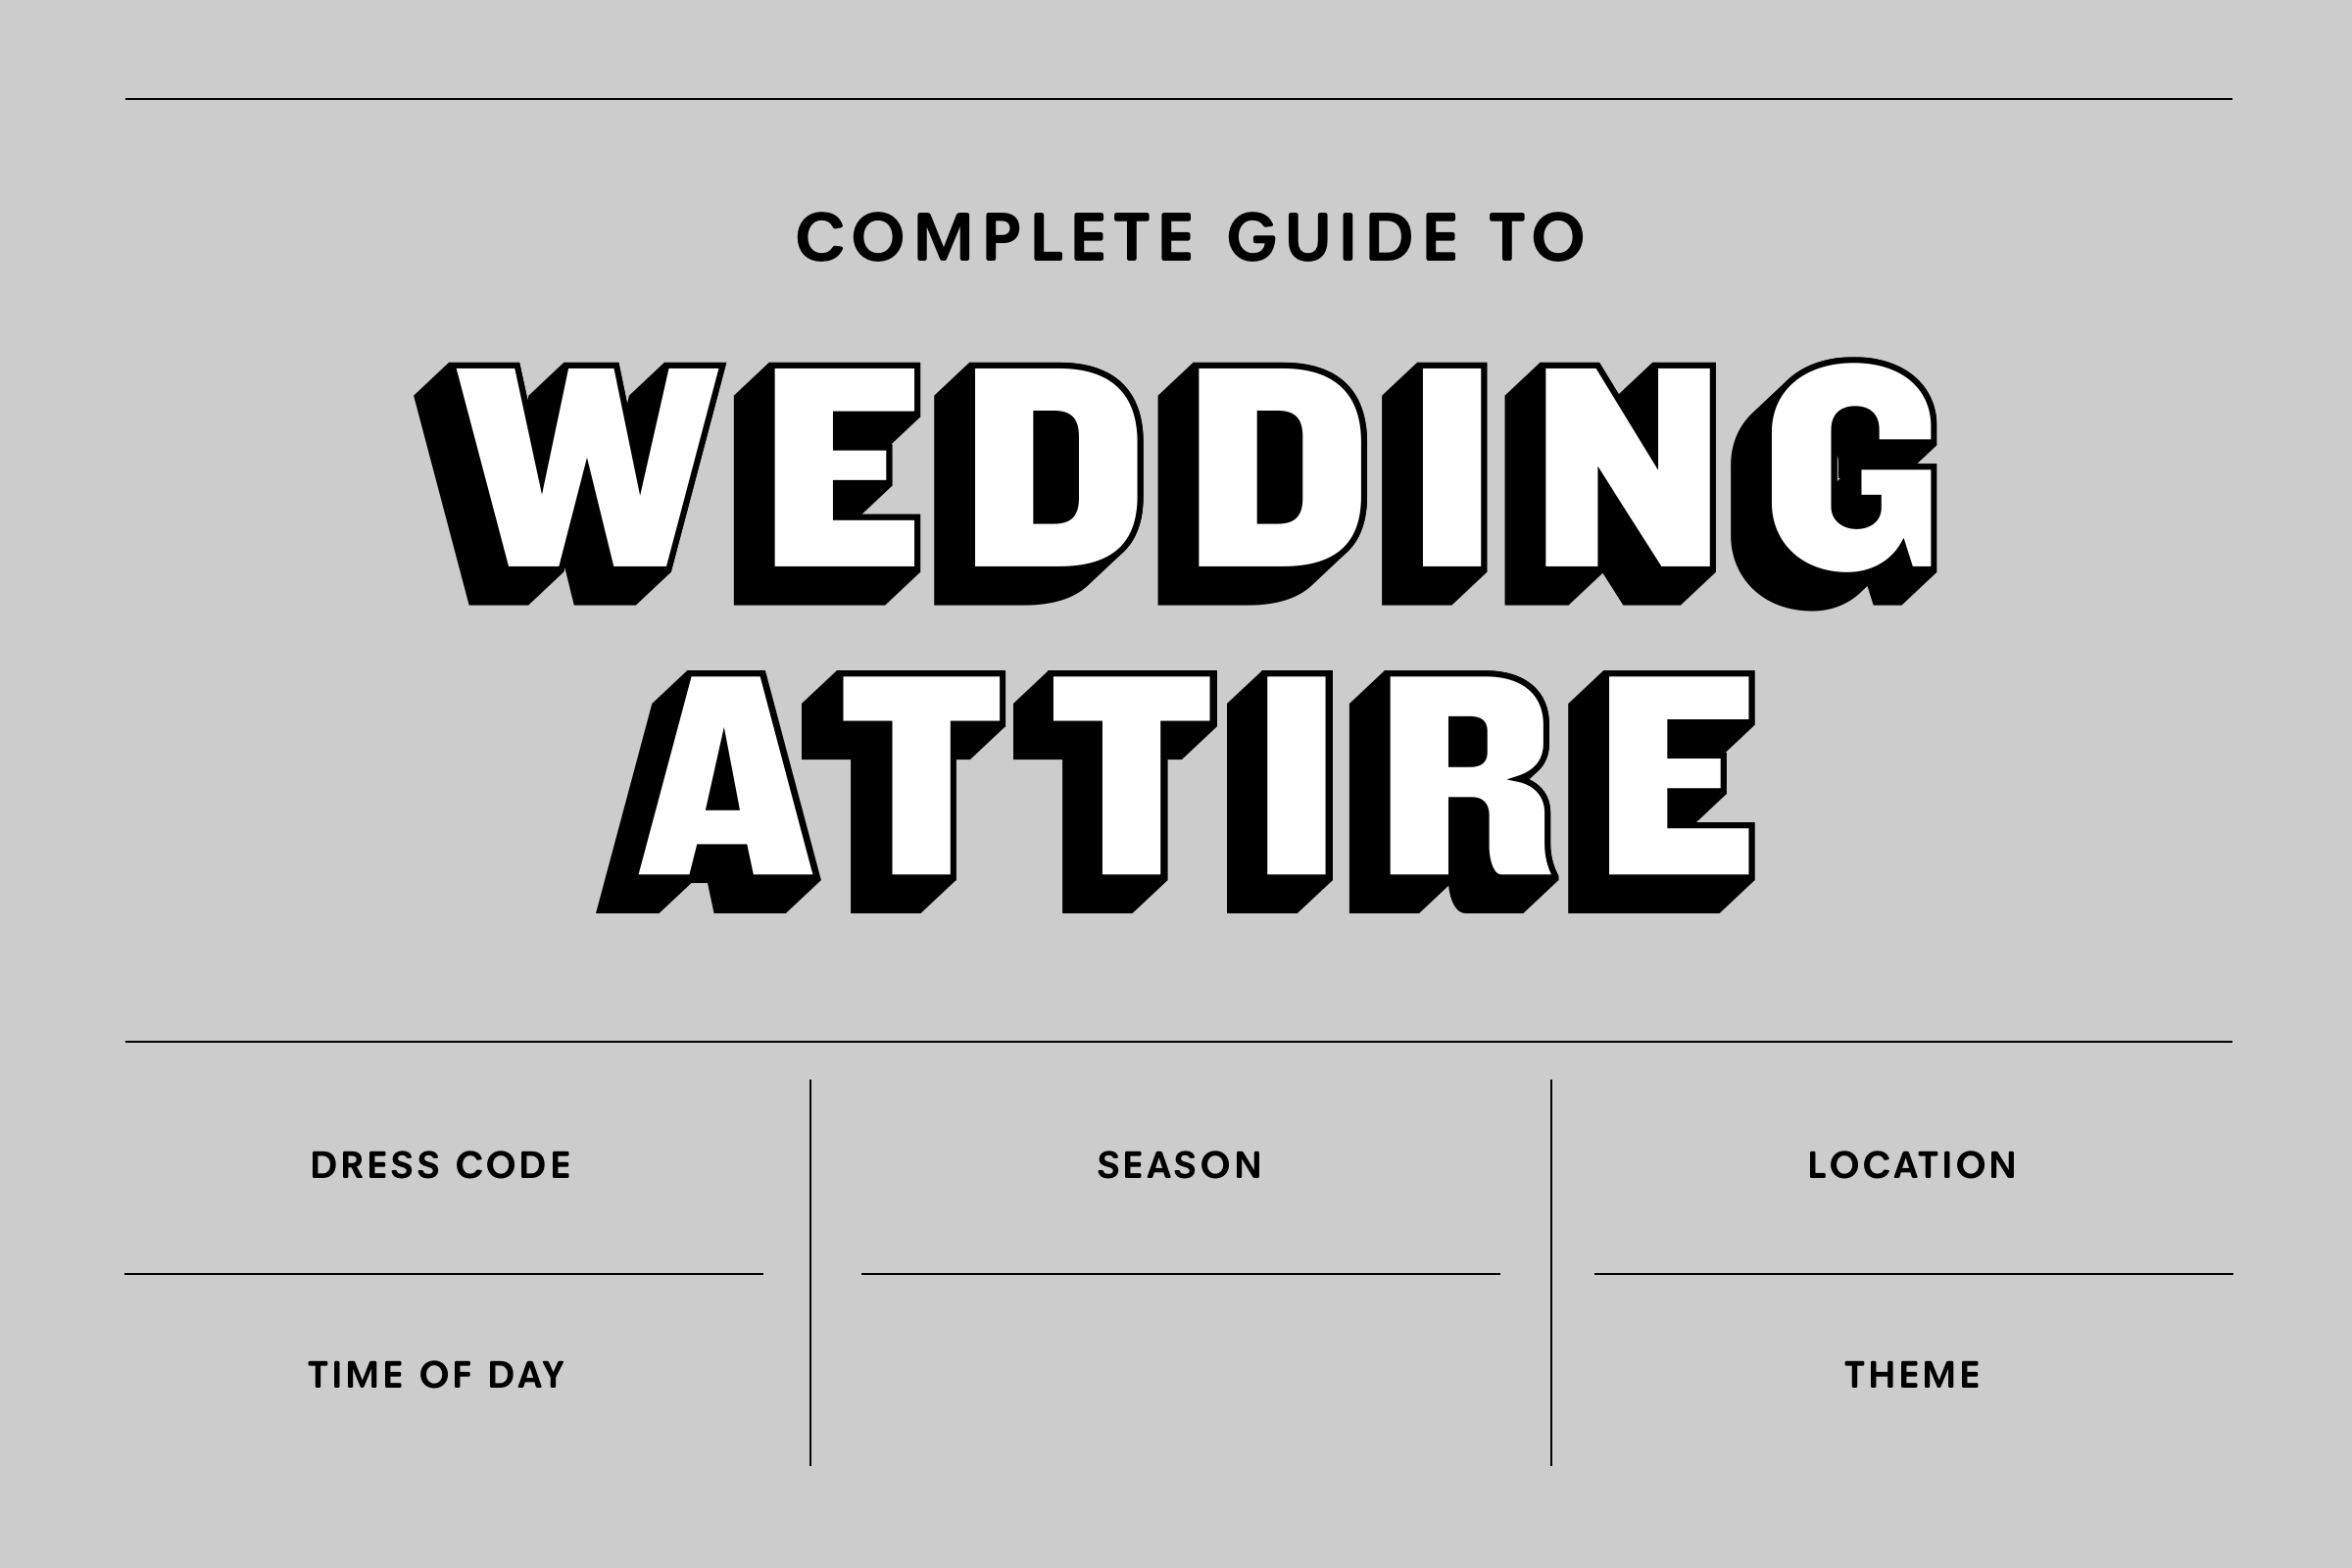 A Man's Guide to Wedding Attire Dress Codes: Black-Tie to Casual – Tip Top